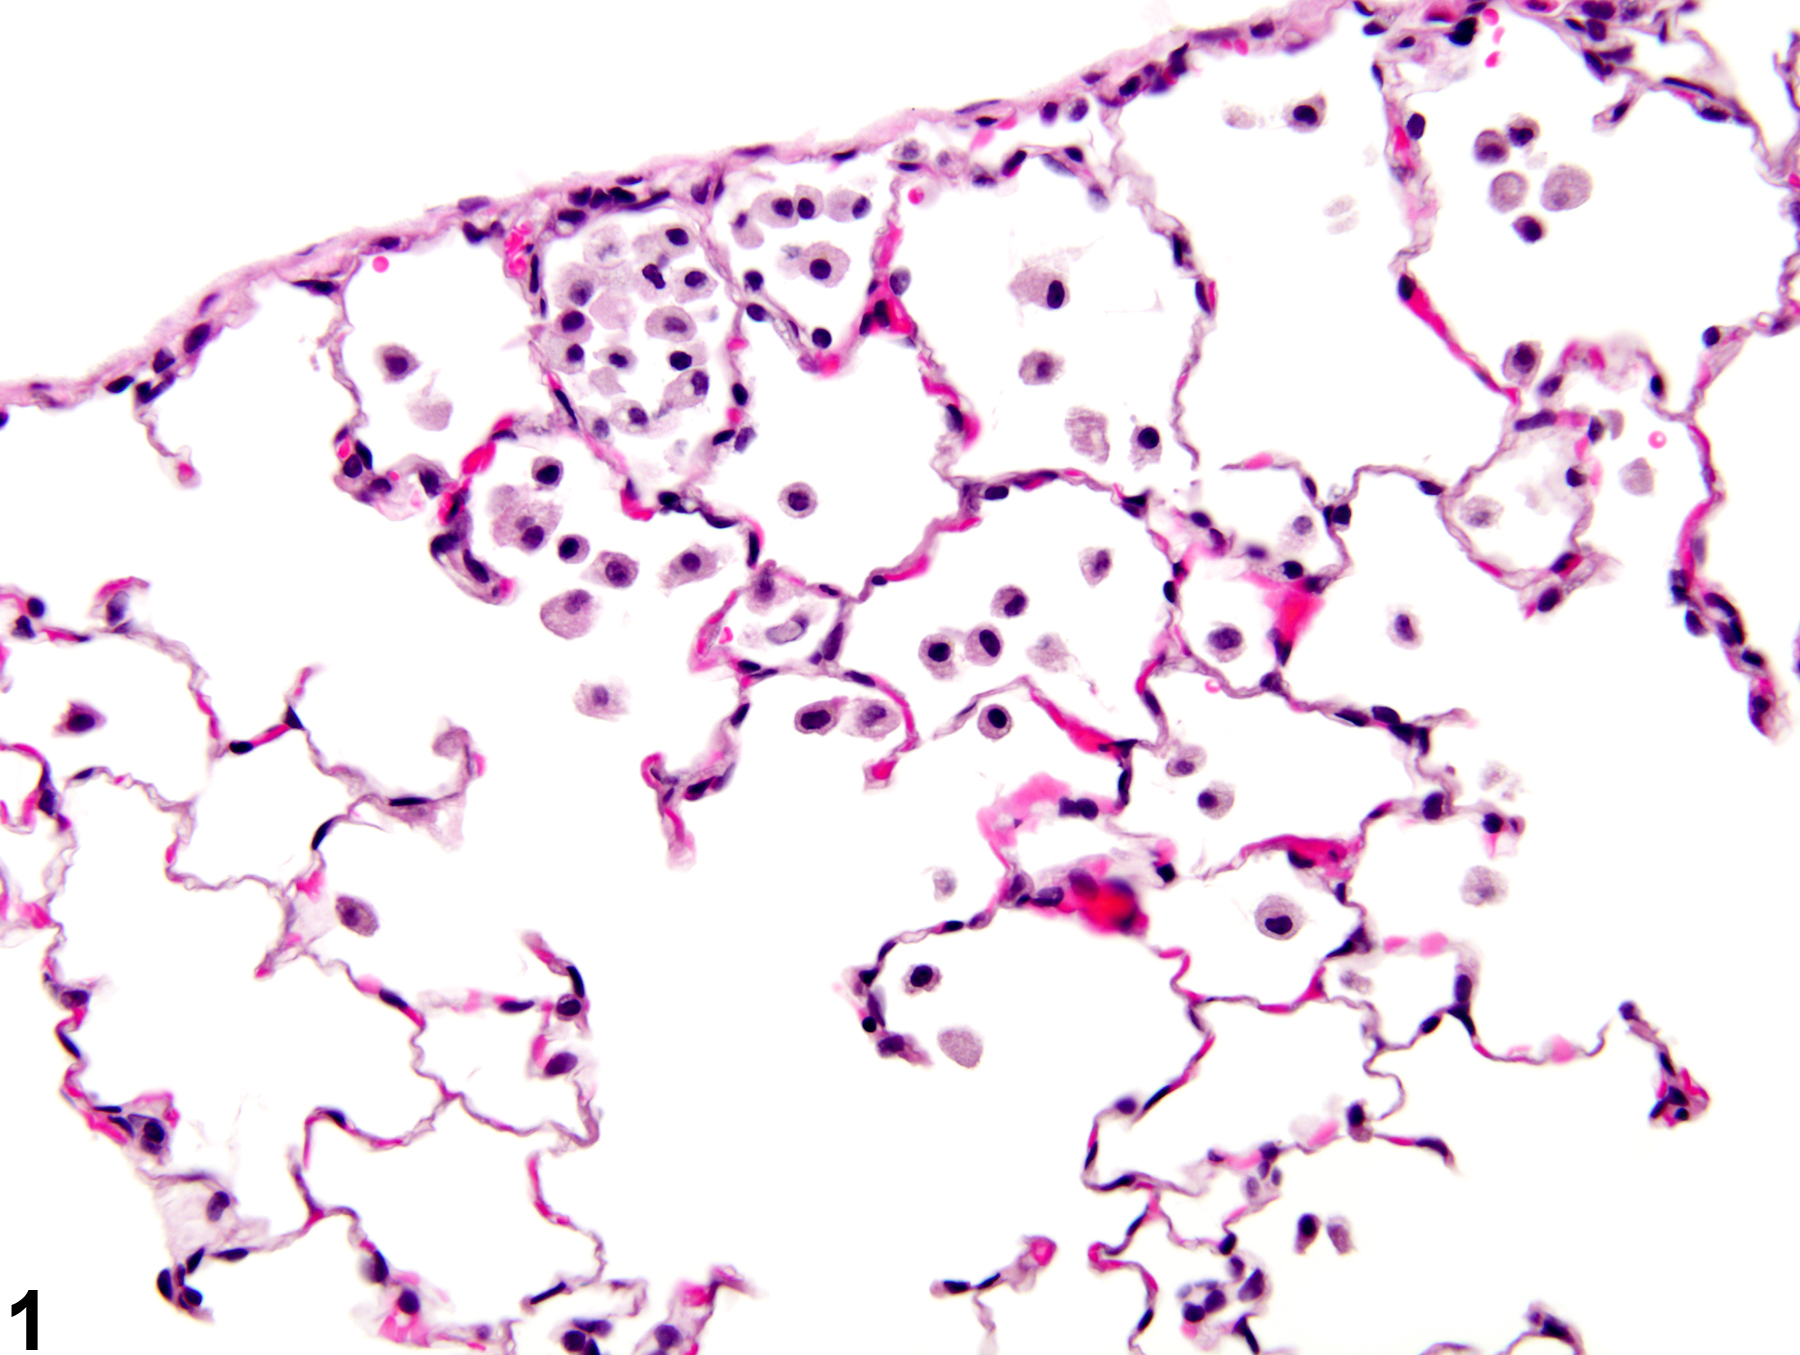 Image of infiltration cellular, histiocyte in the lung from a male Wistar Han rat in a subchronic study